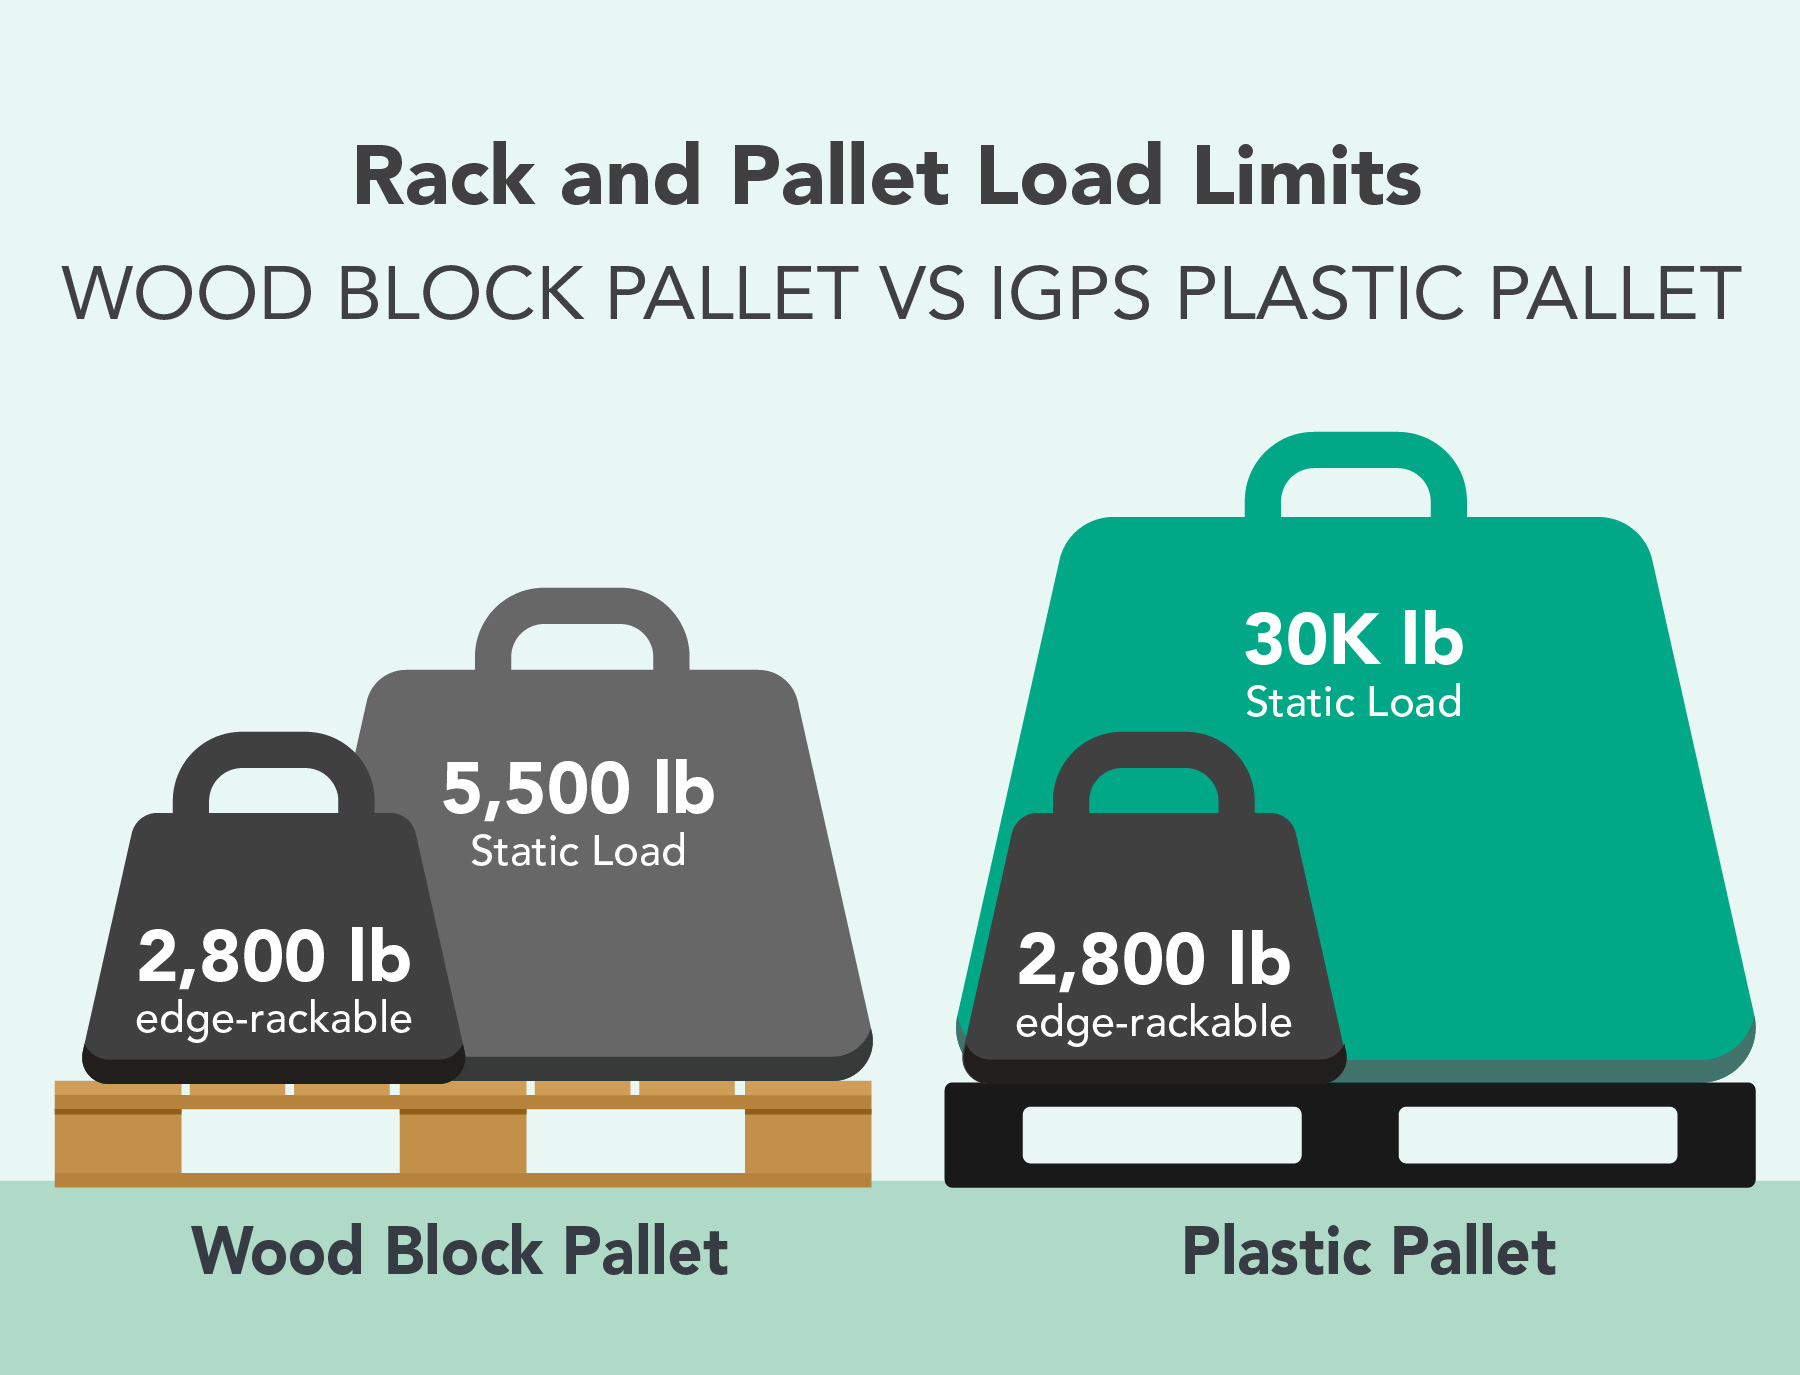 Graphic for iGPS Blog Warehouse Racking Safety Guidelines highlighting Rack and Pallet load limits of wood vs plastic pallets